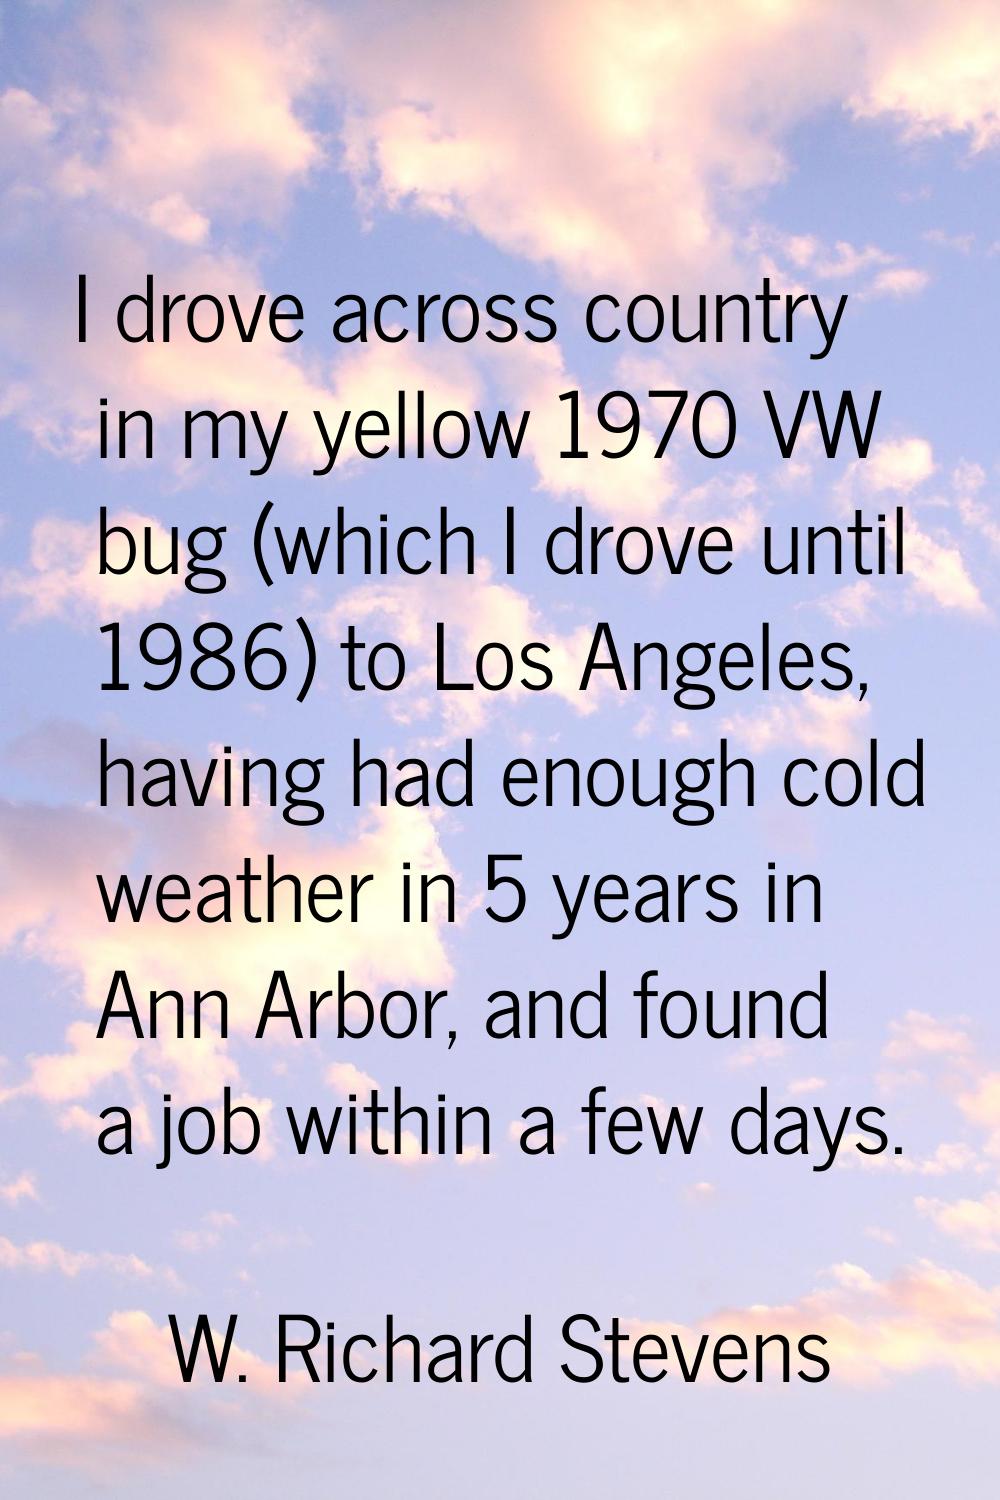 I drove across country in my yellow 1970 VW bug (which I drove until 1986) to Los Angeles, having h